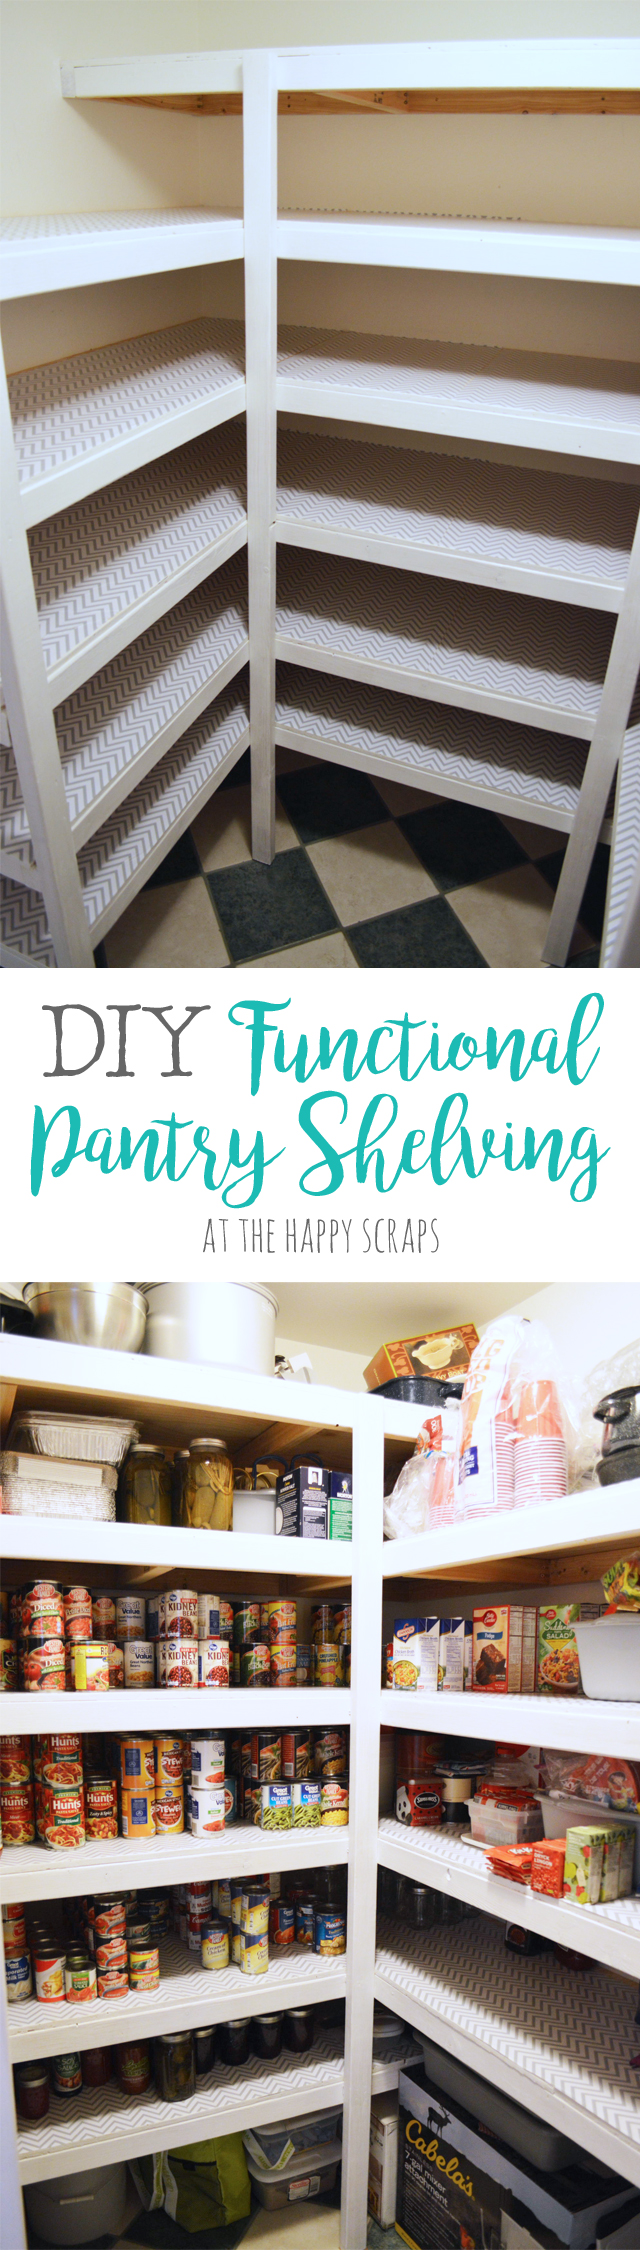 Diy Functional Pantry Shelving The, What Can I Use For Pantry Shelves